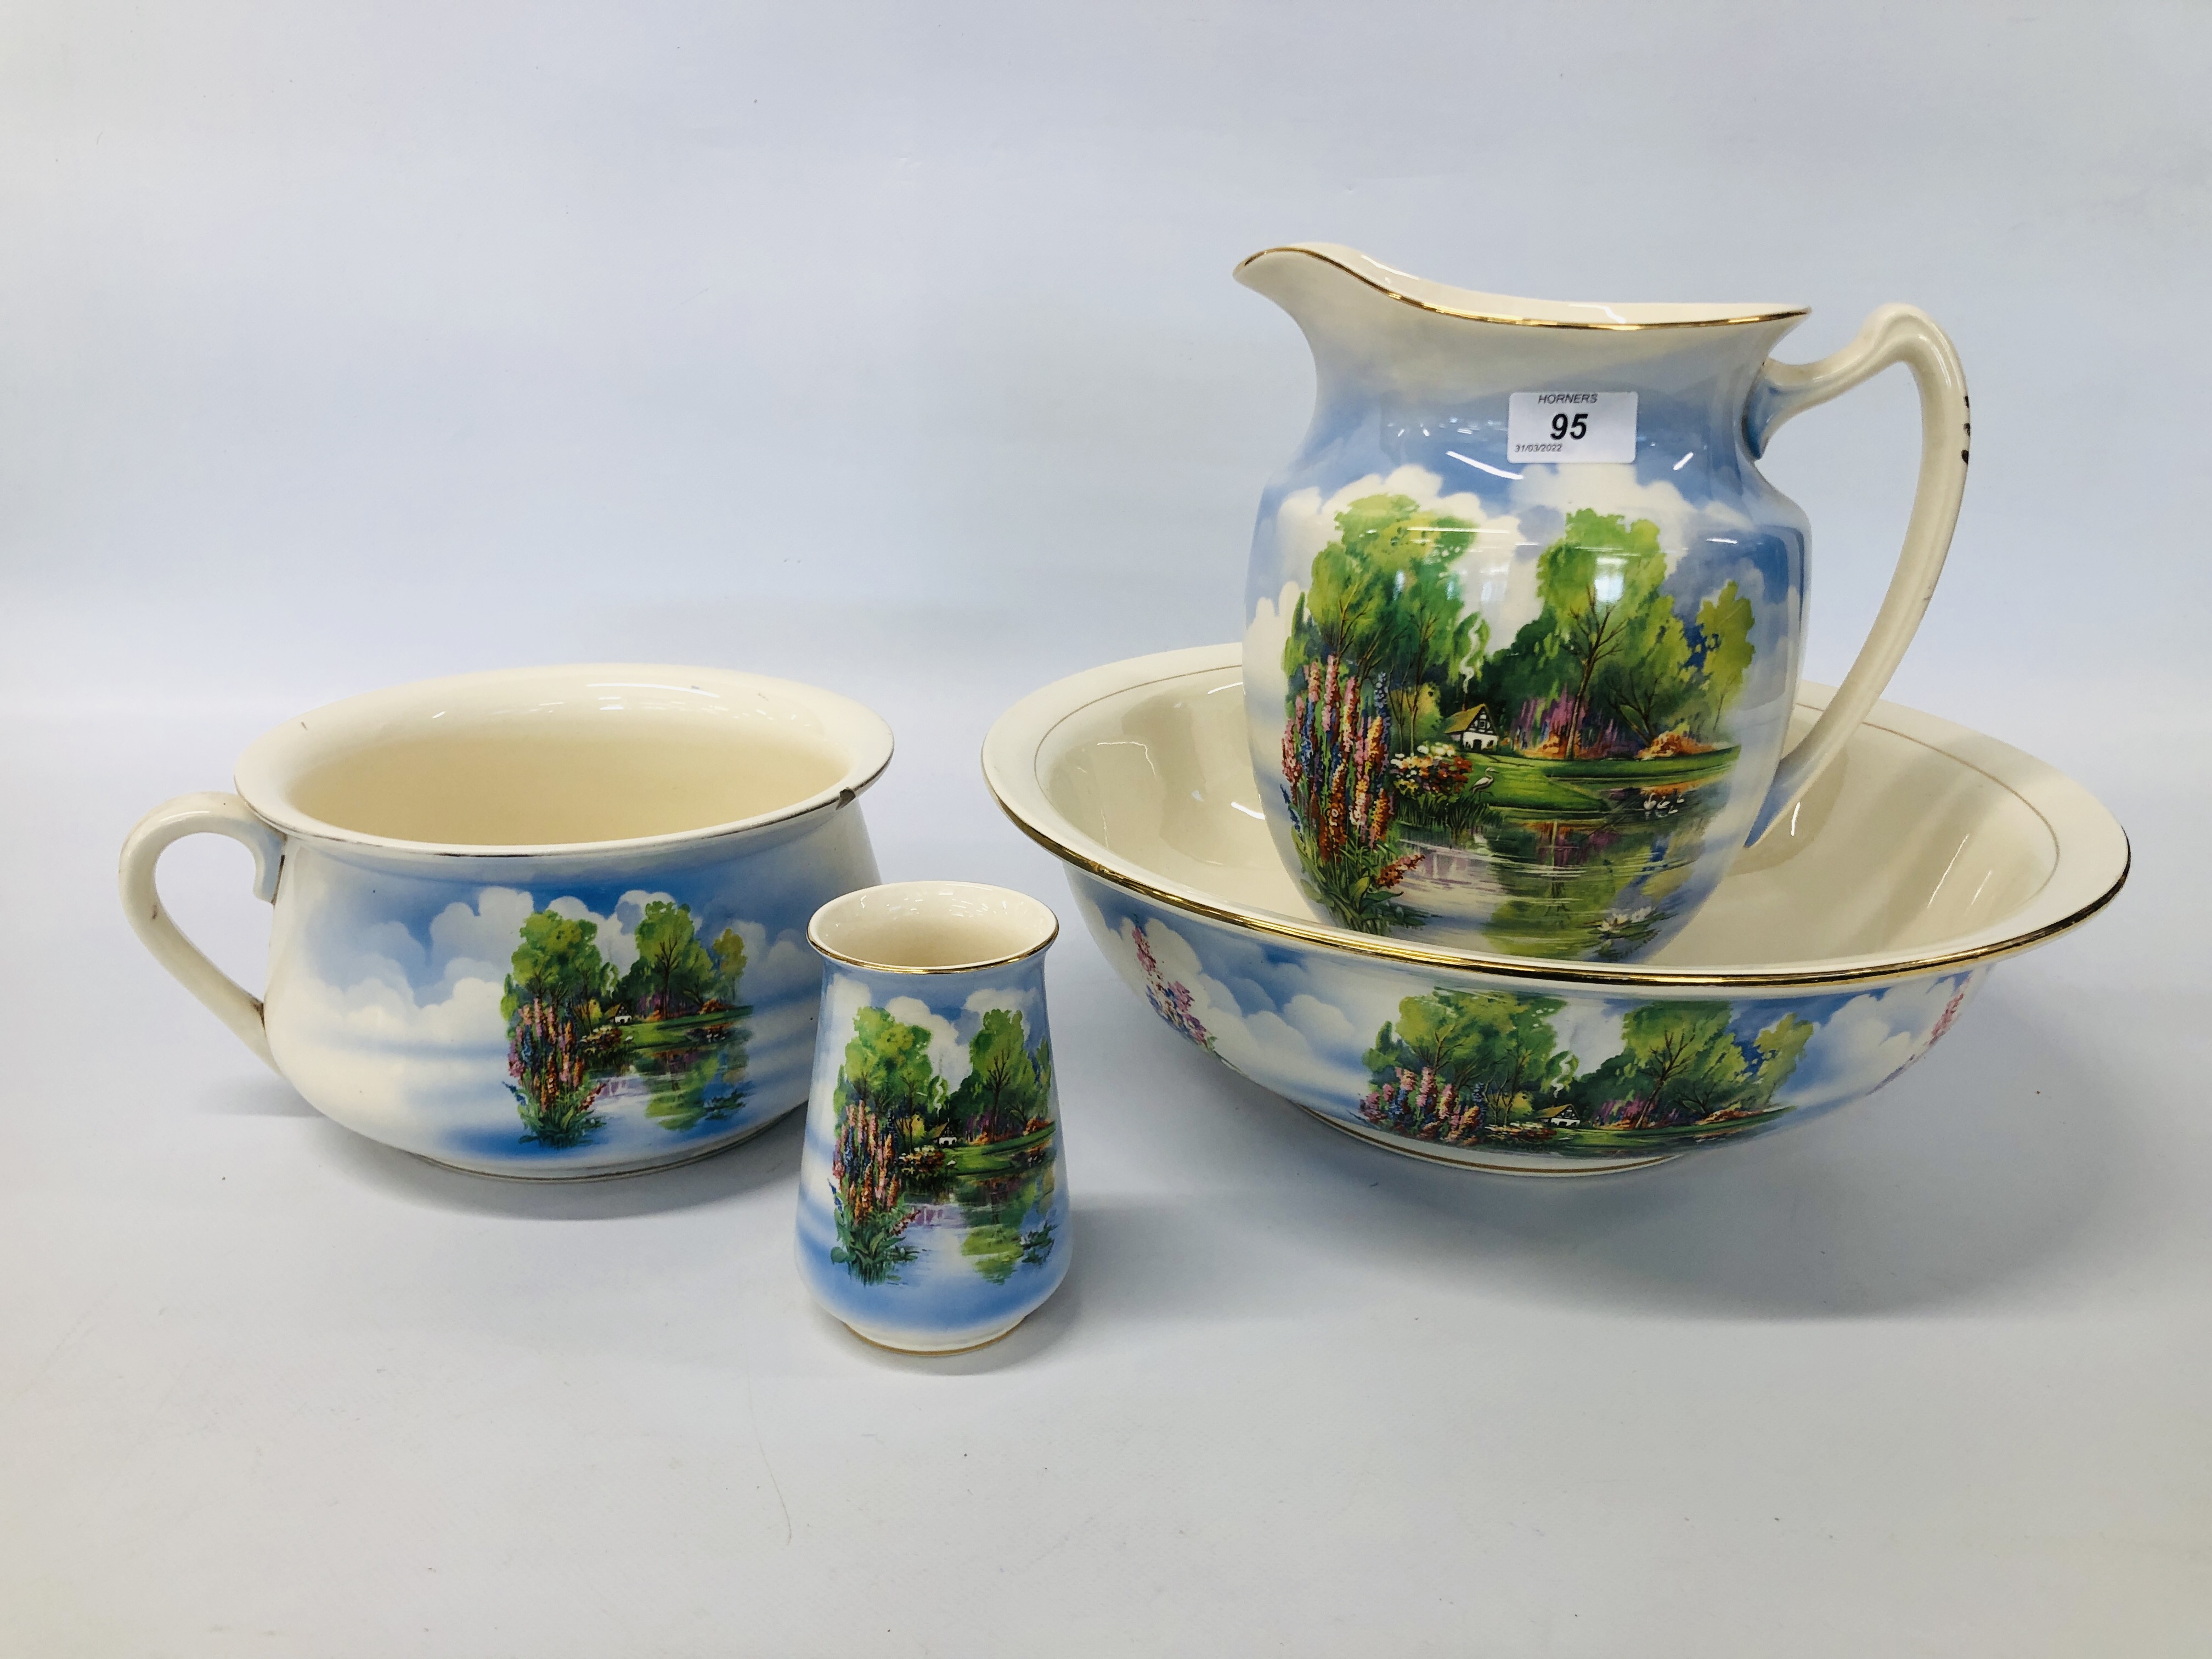 A VINTAGE FALCON WARE DECORATED WASH JUG AND BOWL SET ALONG WITH MATCHING VASE AND CHAMBER POT.